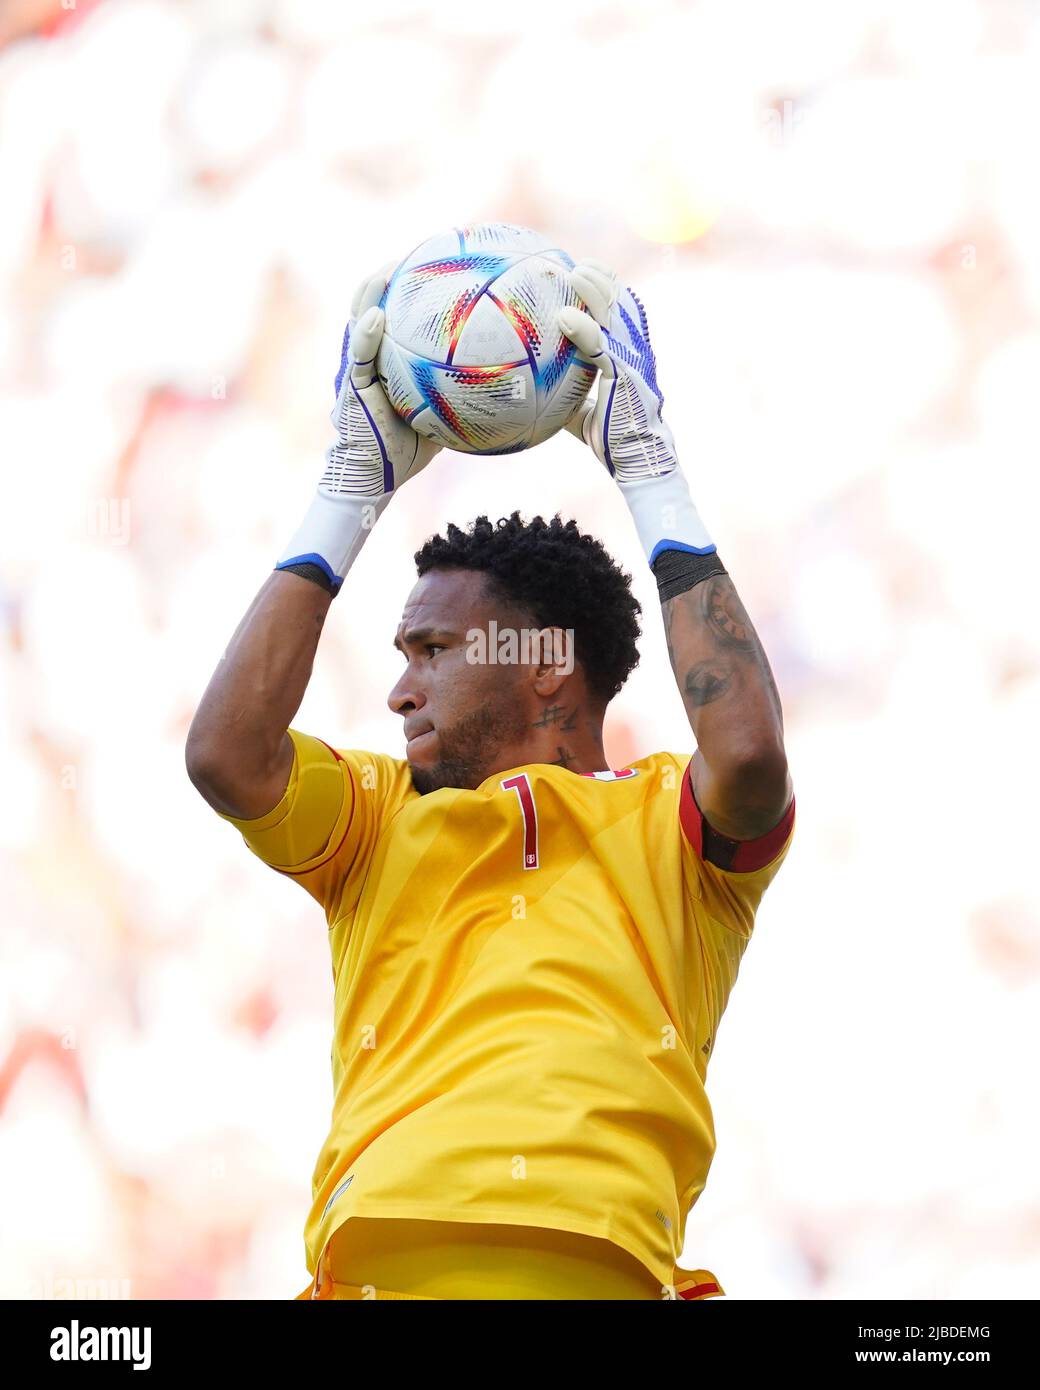 Barcelona, Spain. June 5, 2022, Pedro Gallese of Peru during the friendly match between Peru and New Zealand played at RCDE Stadium on June 5, 2022 in Barcelona, Spain. (Photo by Bagu Blanco / PRESSINPHOTO) Stock Photo